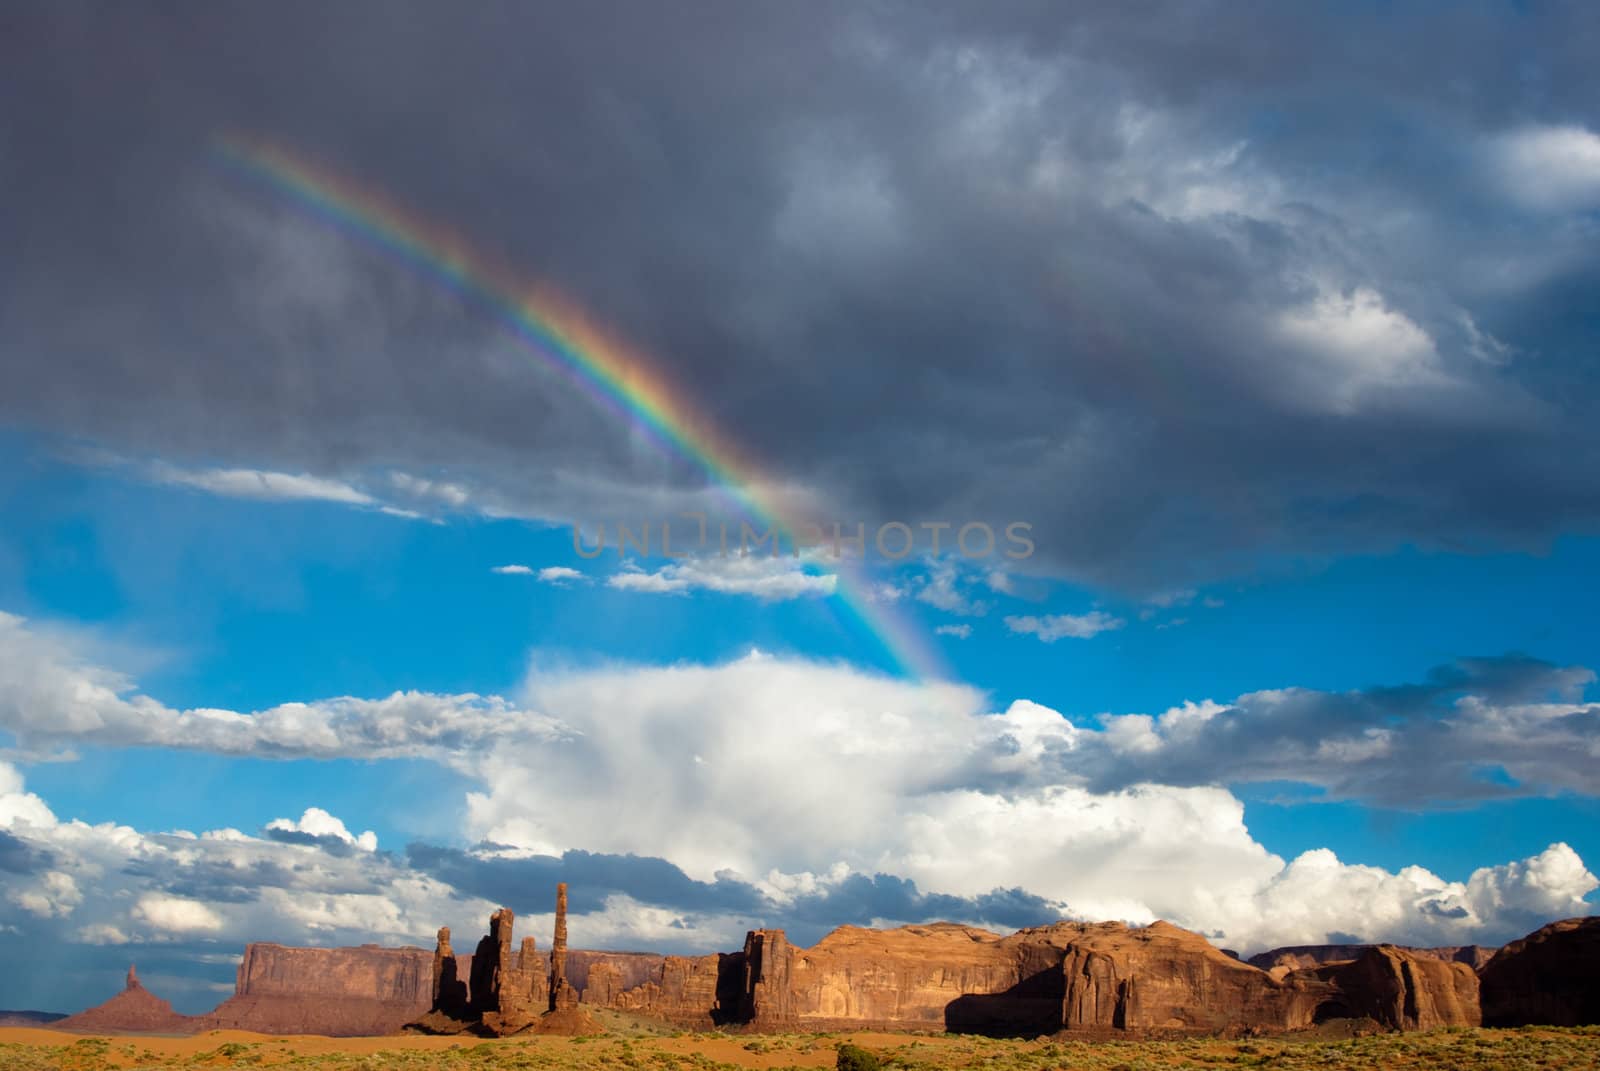 Rainbow over Monument Valley after the storm